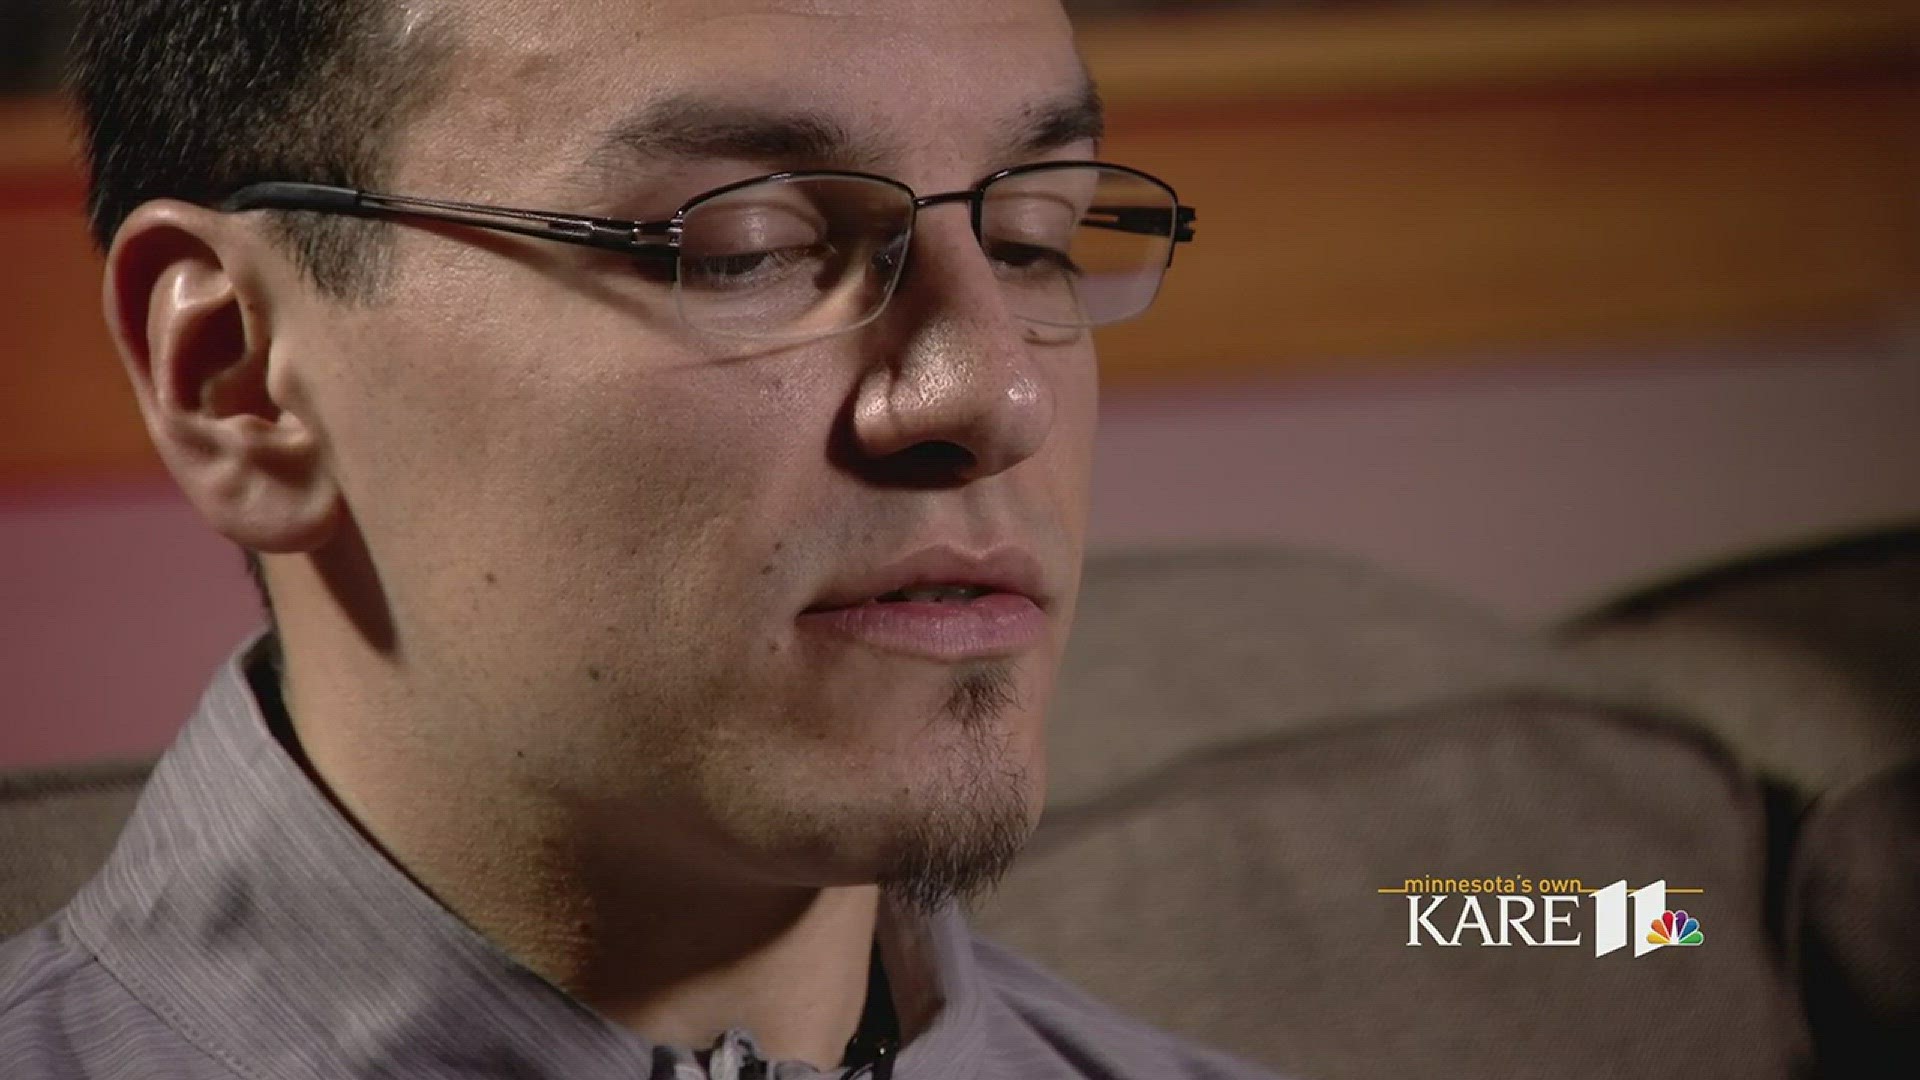 March 21 will mark the 13-year anniversary of the worst school shooting in Minnesota history. Two survivors of that horrific day in Red Lake share their experience. http://kare11.tv/2F3ZJbN